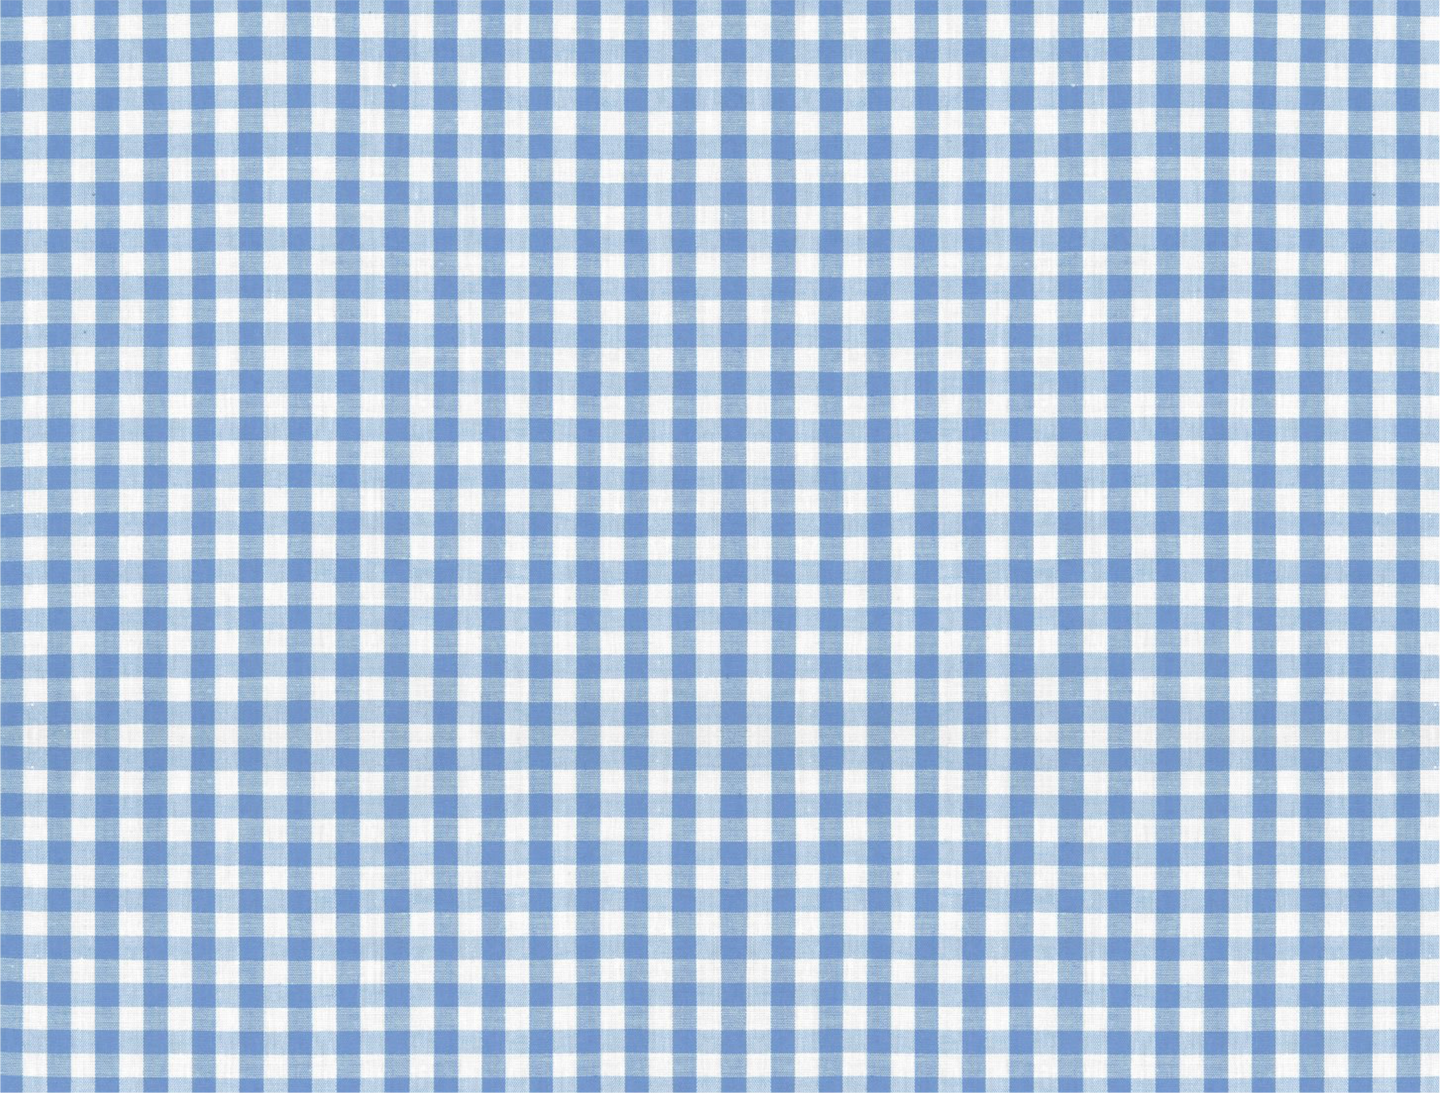 The Blue Gingham Collection